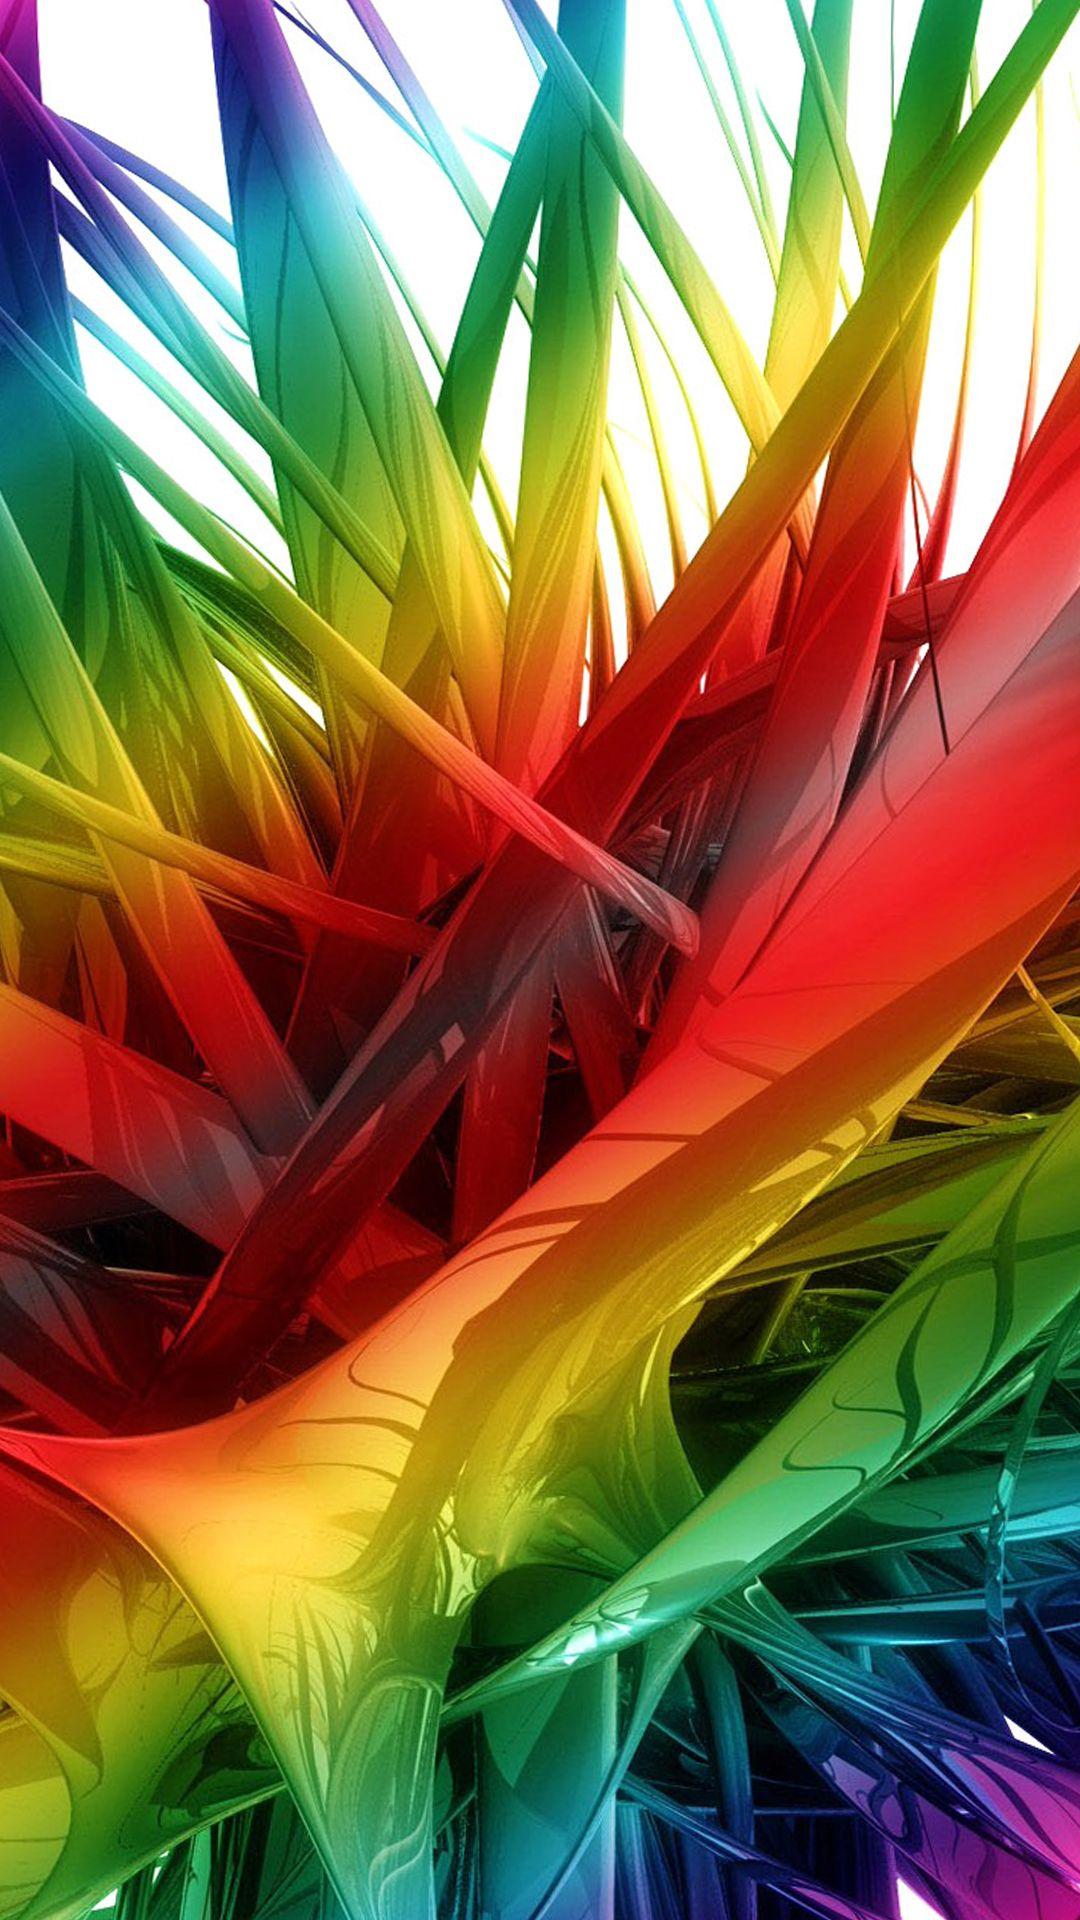 Abstract Colorful Wallpaper for Android Phones with 5 inch Display. Android wallpaper, Colorful wallpaper, Wallpaper